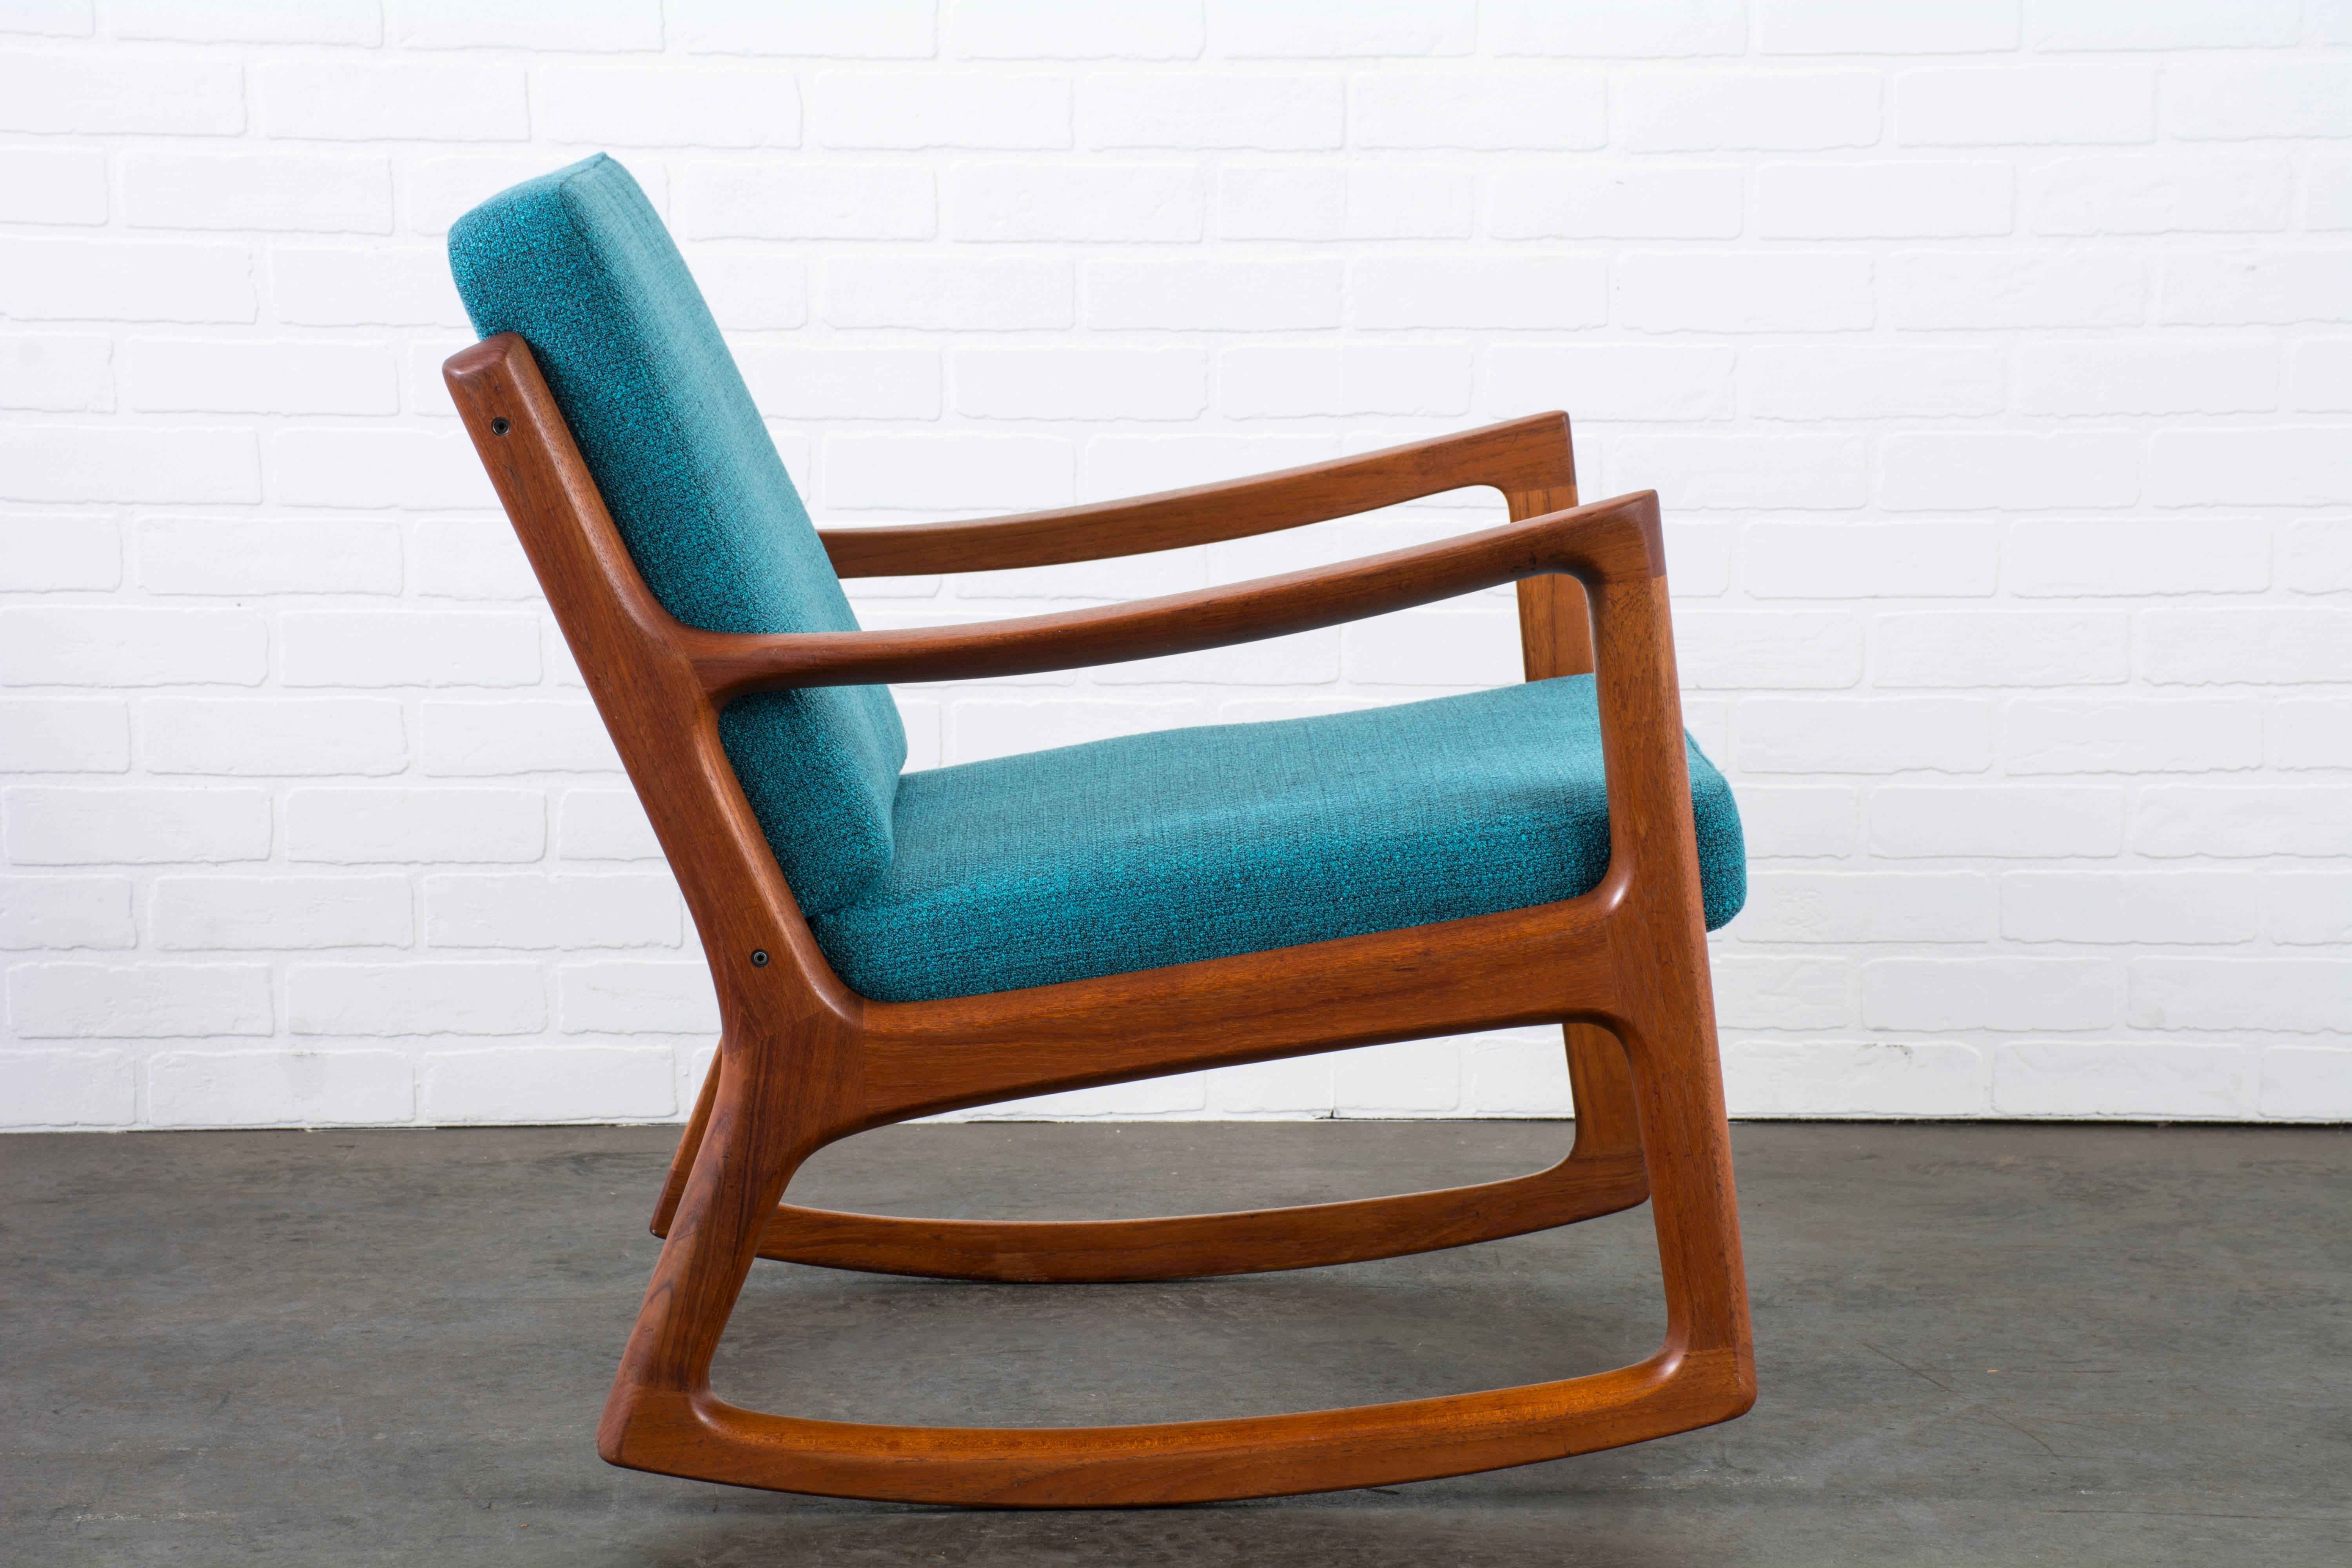 This vintage Midcentury teak rocking chair was designed by Ole Wanscher for France & Daverkosen in the 1950s, Denmark. New Danish teal upholstery and new cushion inserts.
